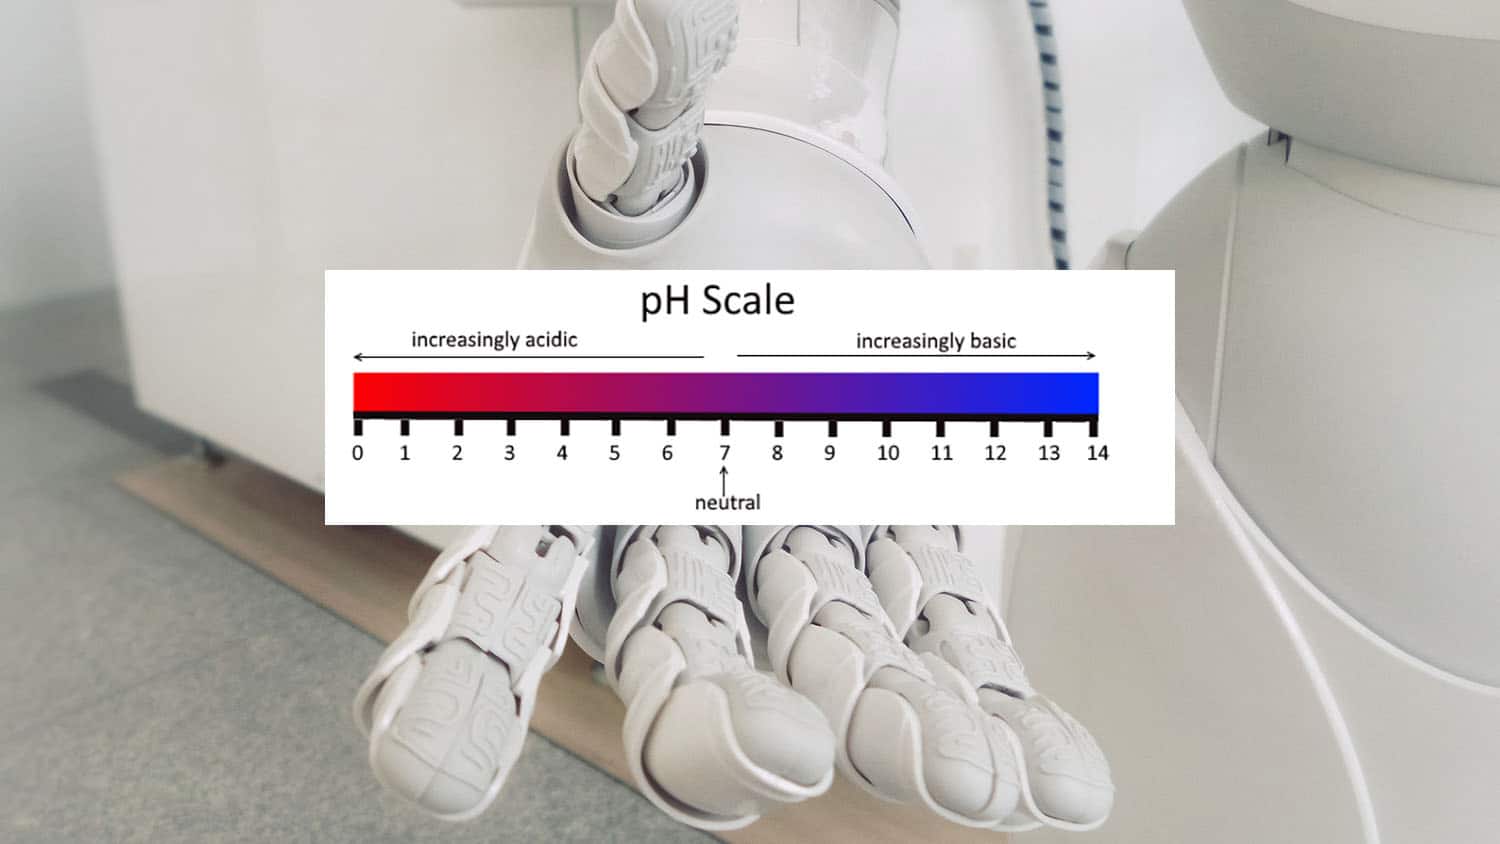 Photo credit of robotic hand: Possessed Photography. Edited to show robot holding a pH scale.